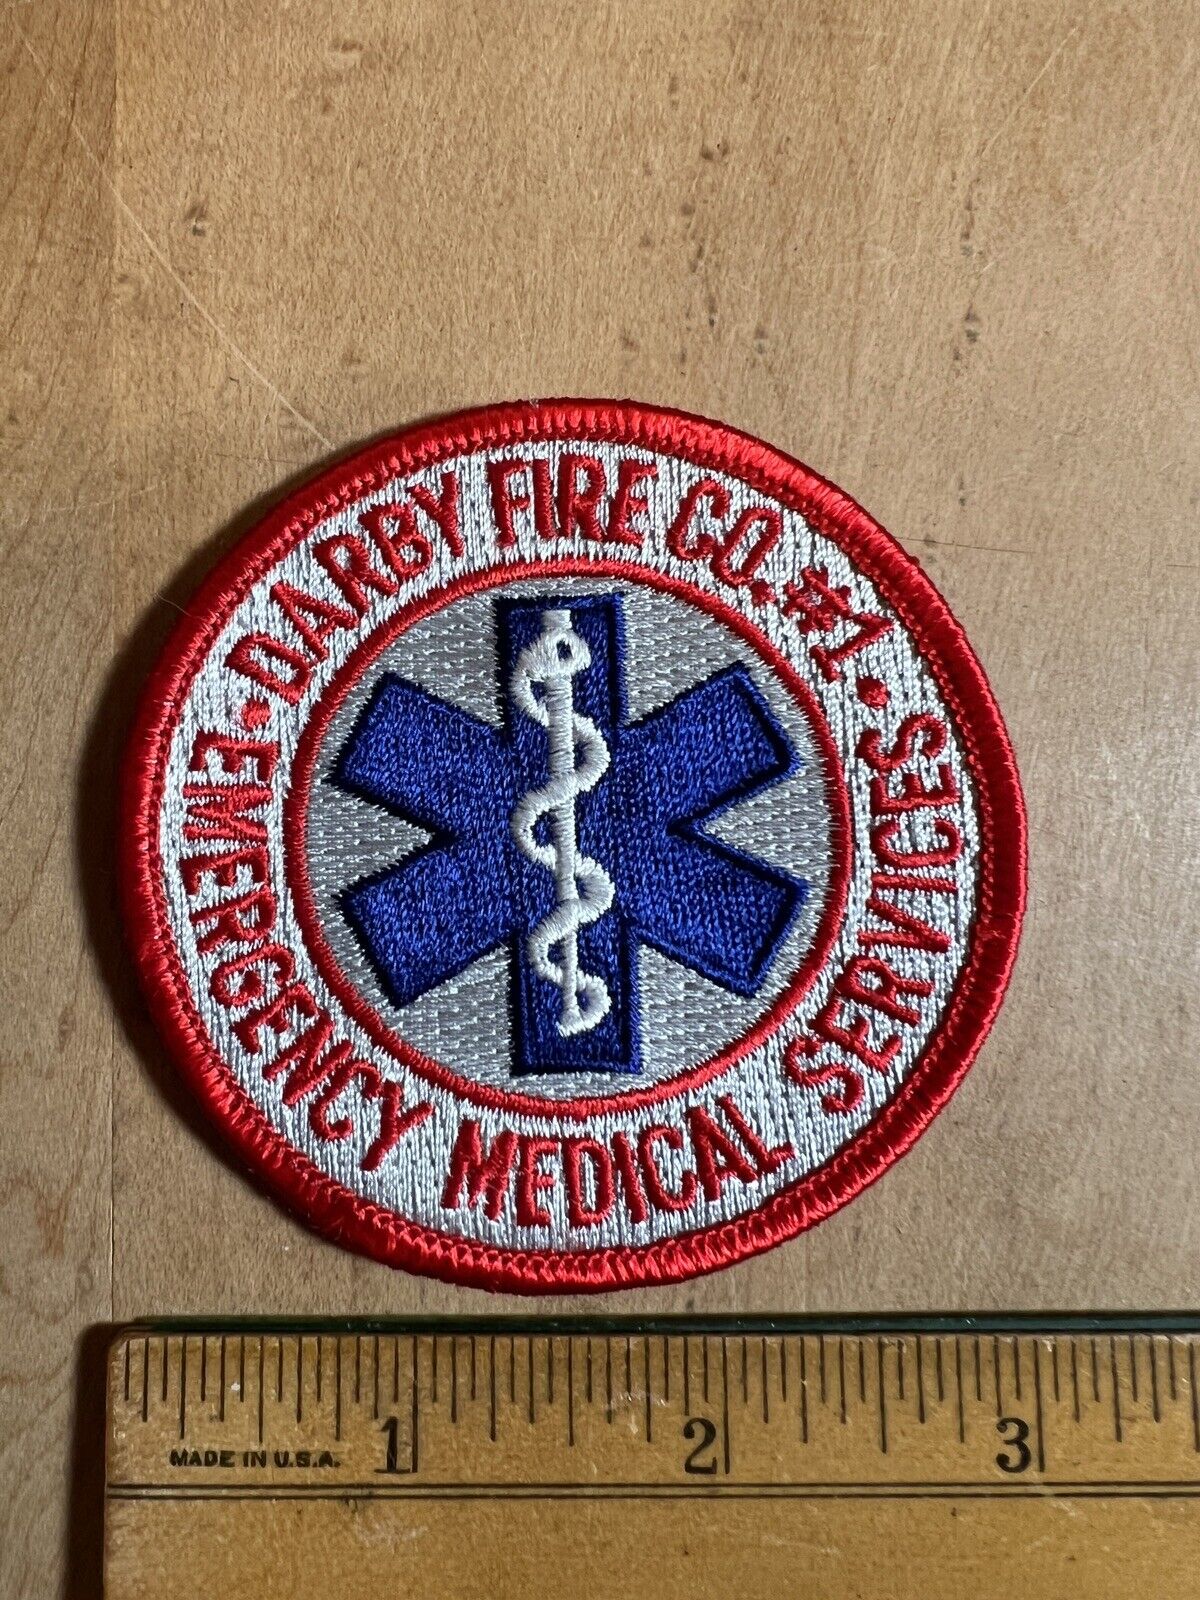 Darby Fire Co #1 Pennsylvaina Emergency Medical Service Patch